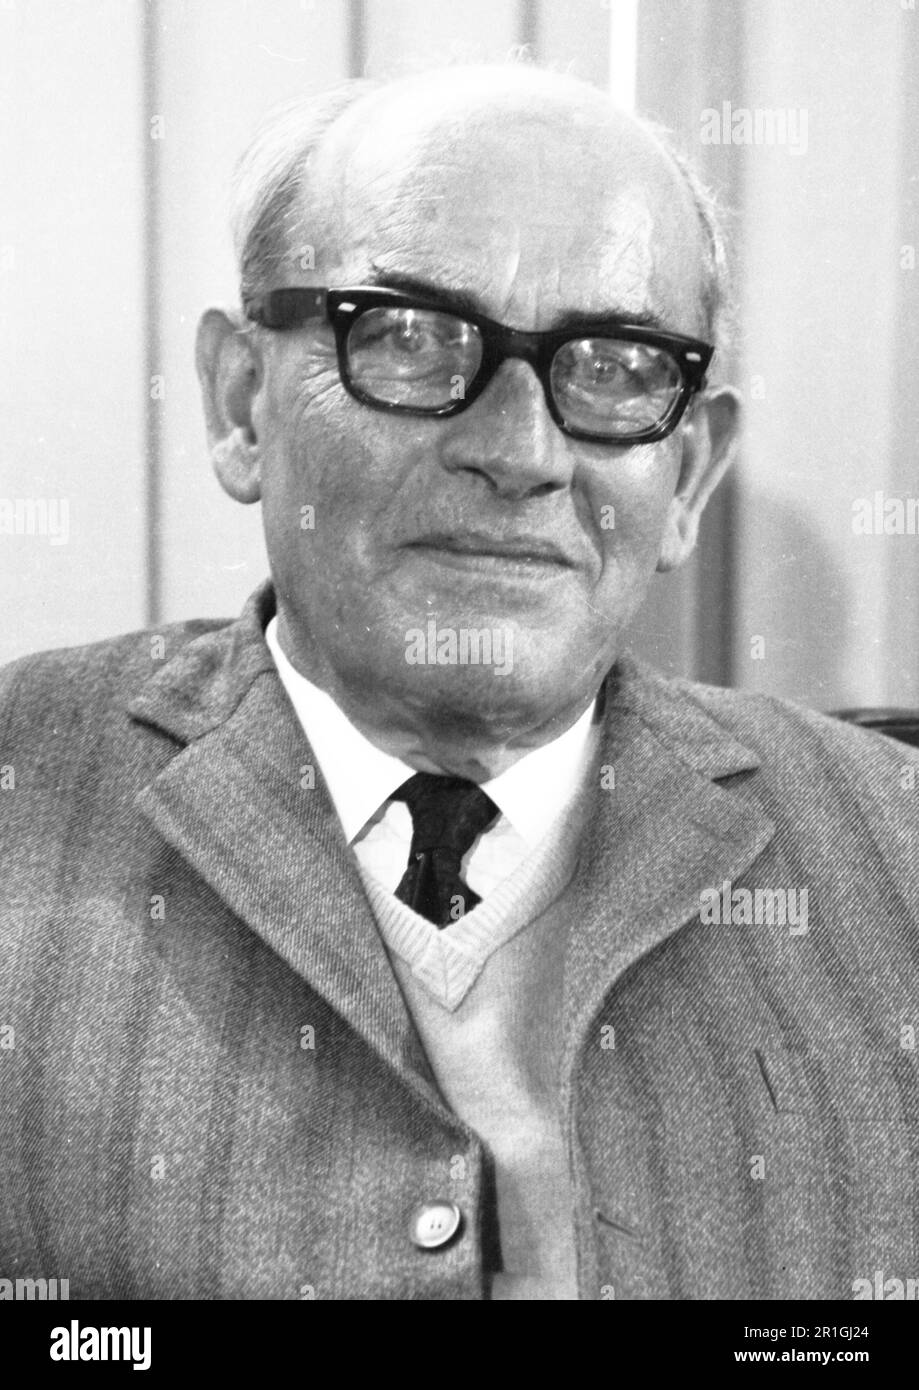 Personalities from politics, economy and culture from the years 1965-71. Prof. Franz Paul Schneider (Staatswiisenschaftler) d. 1970, DEU, Germany Stock Photo